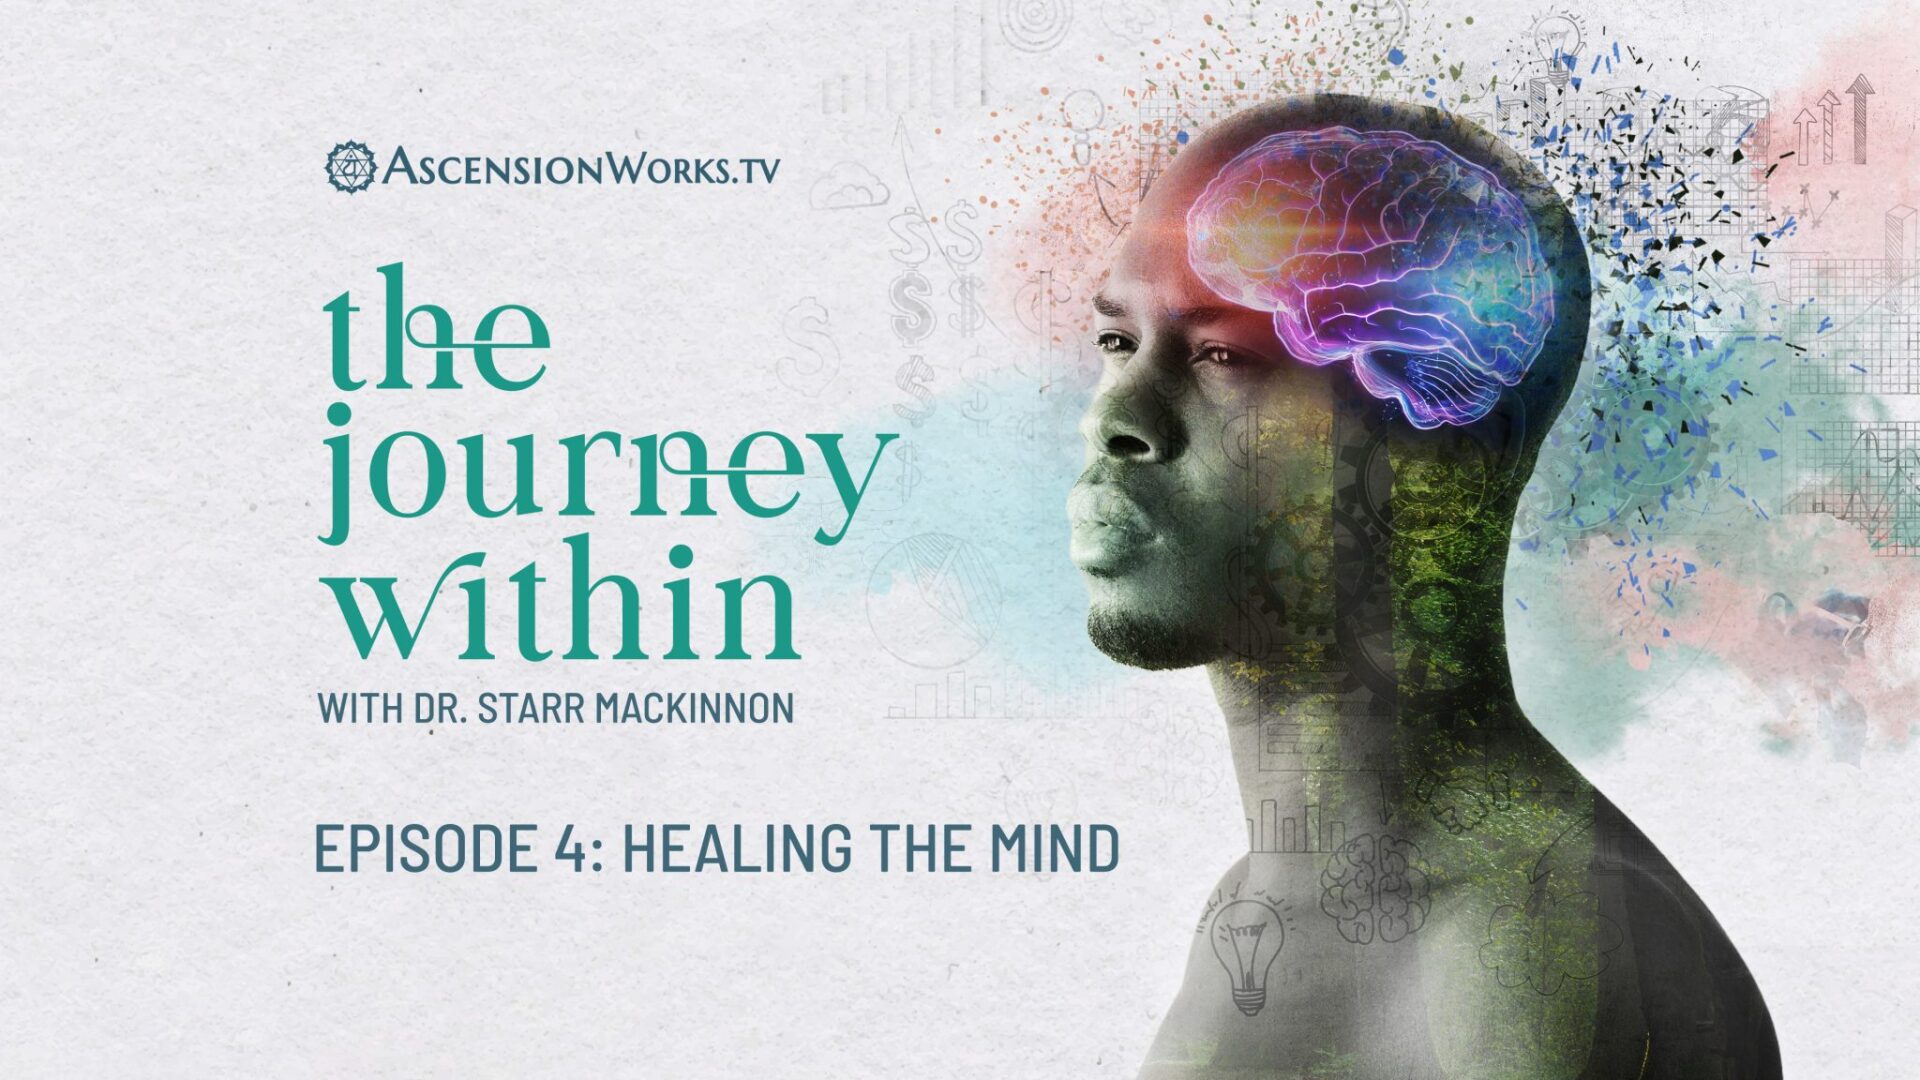 The Journey Within with Dr. Starr MacKinnon Episode 4 - Mindful healing, being present, quietening the mind